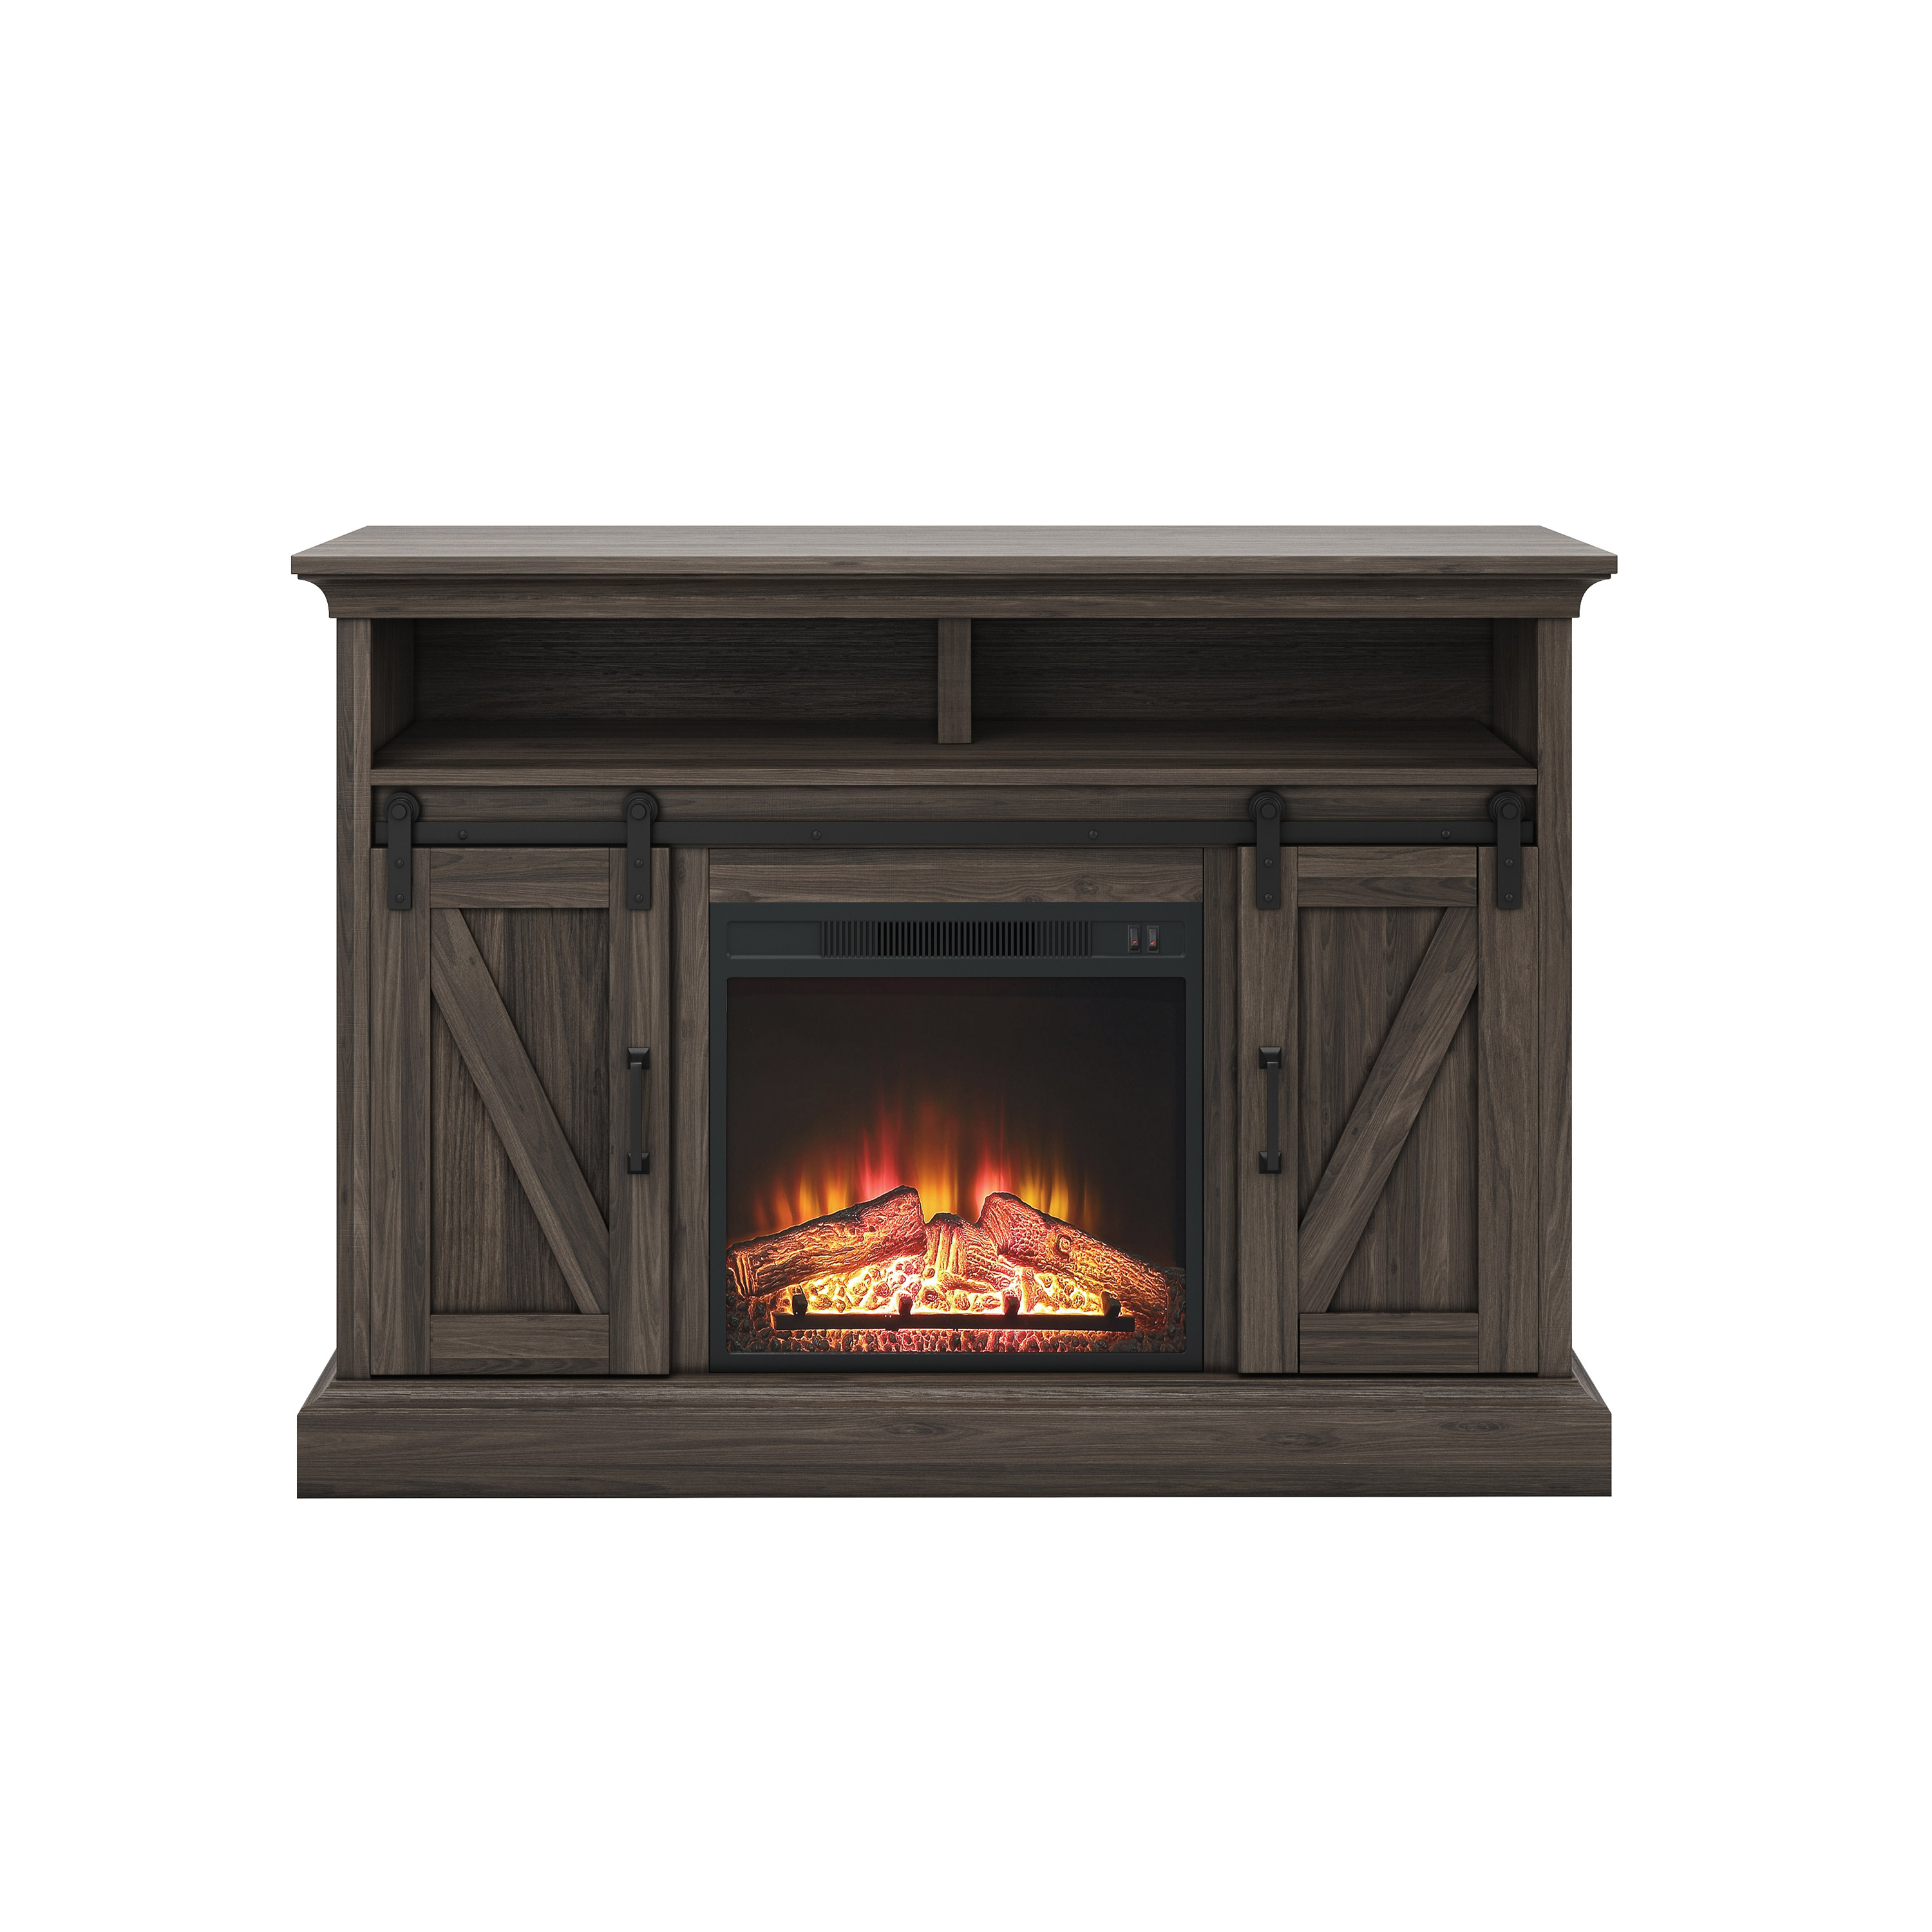 Whalen Allston Barn Door Fireplace TV Stand for TVs Up to 58" - image 4 of 8